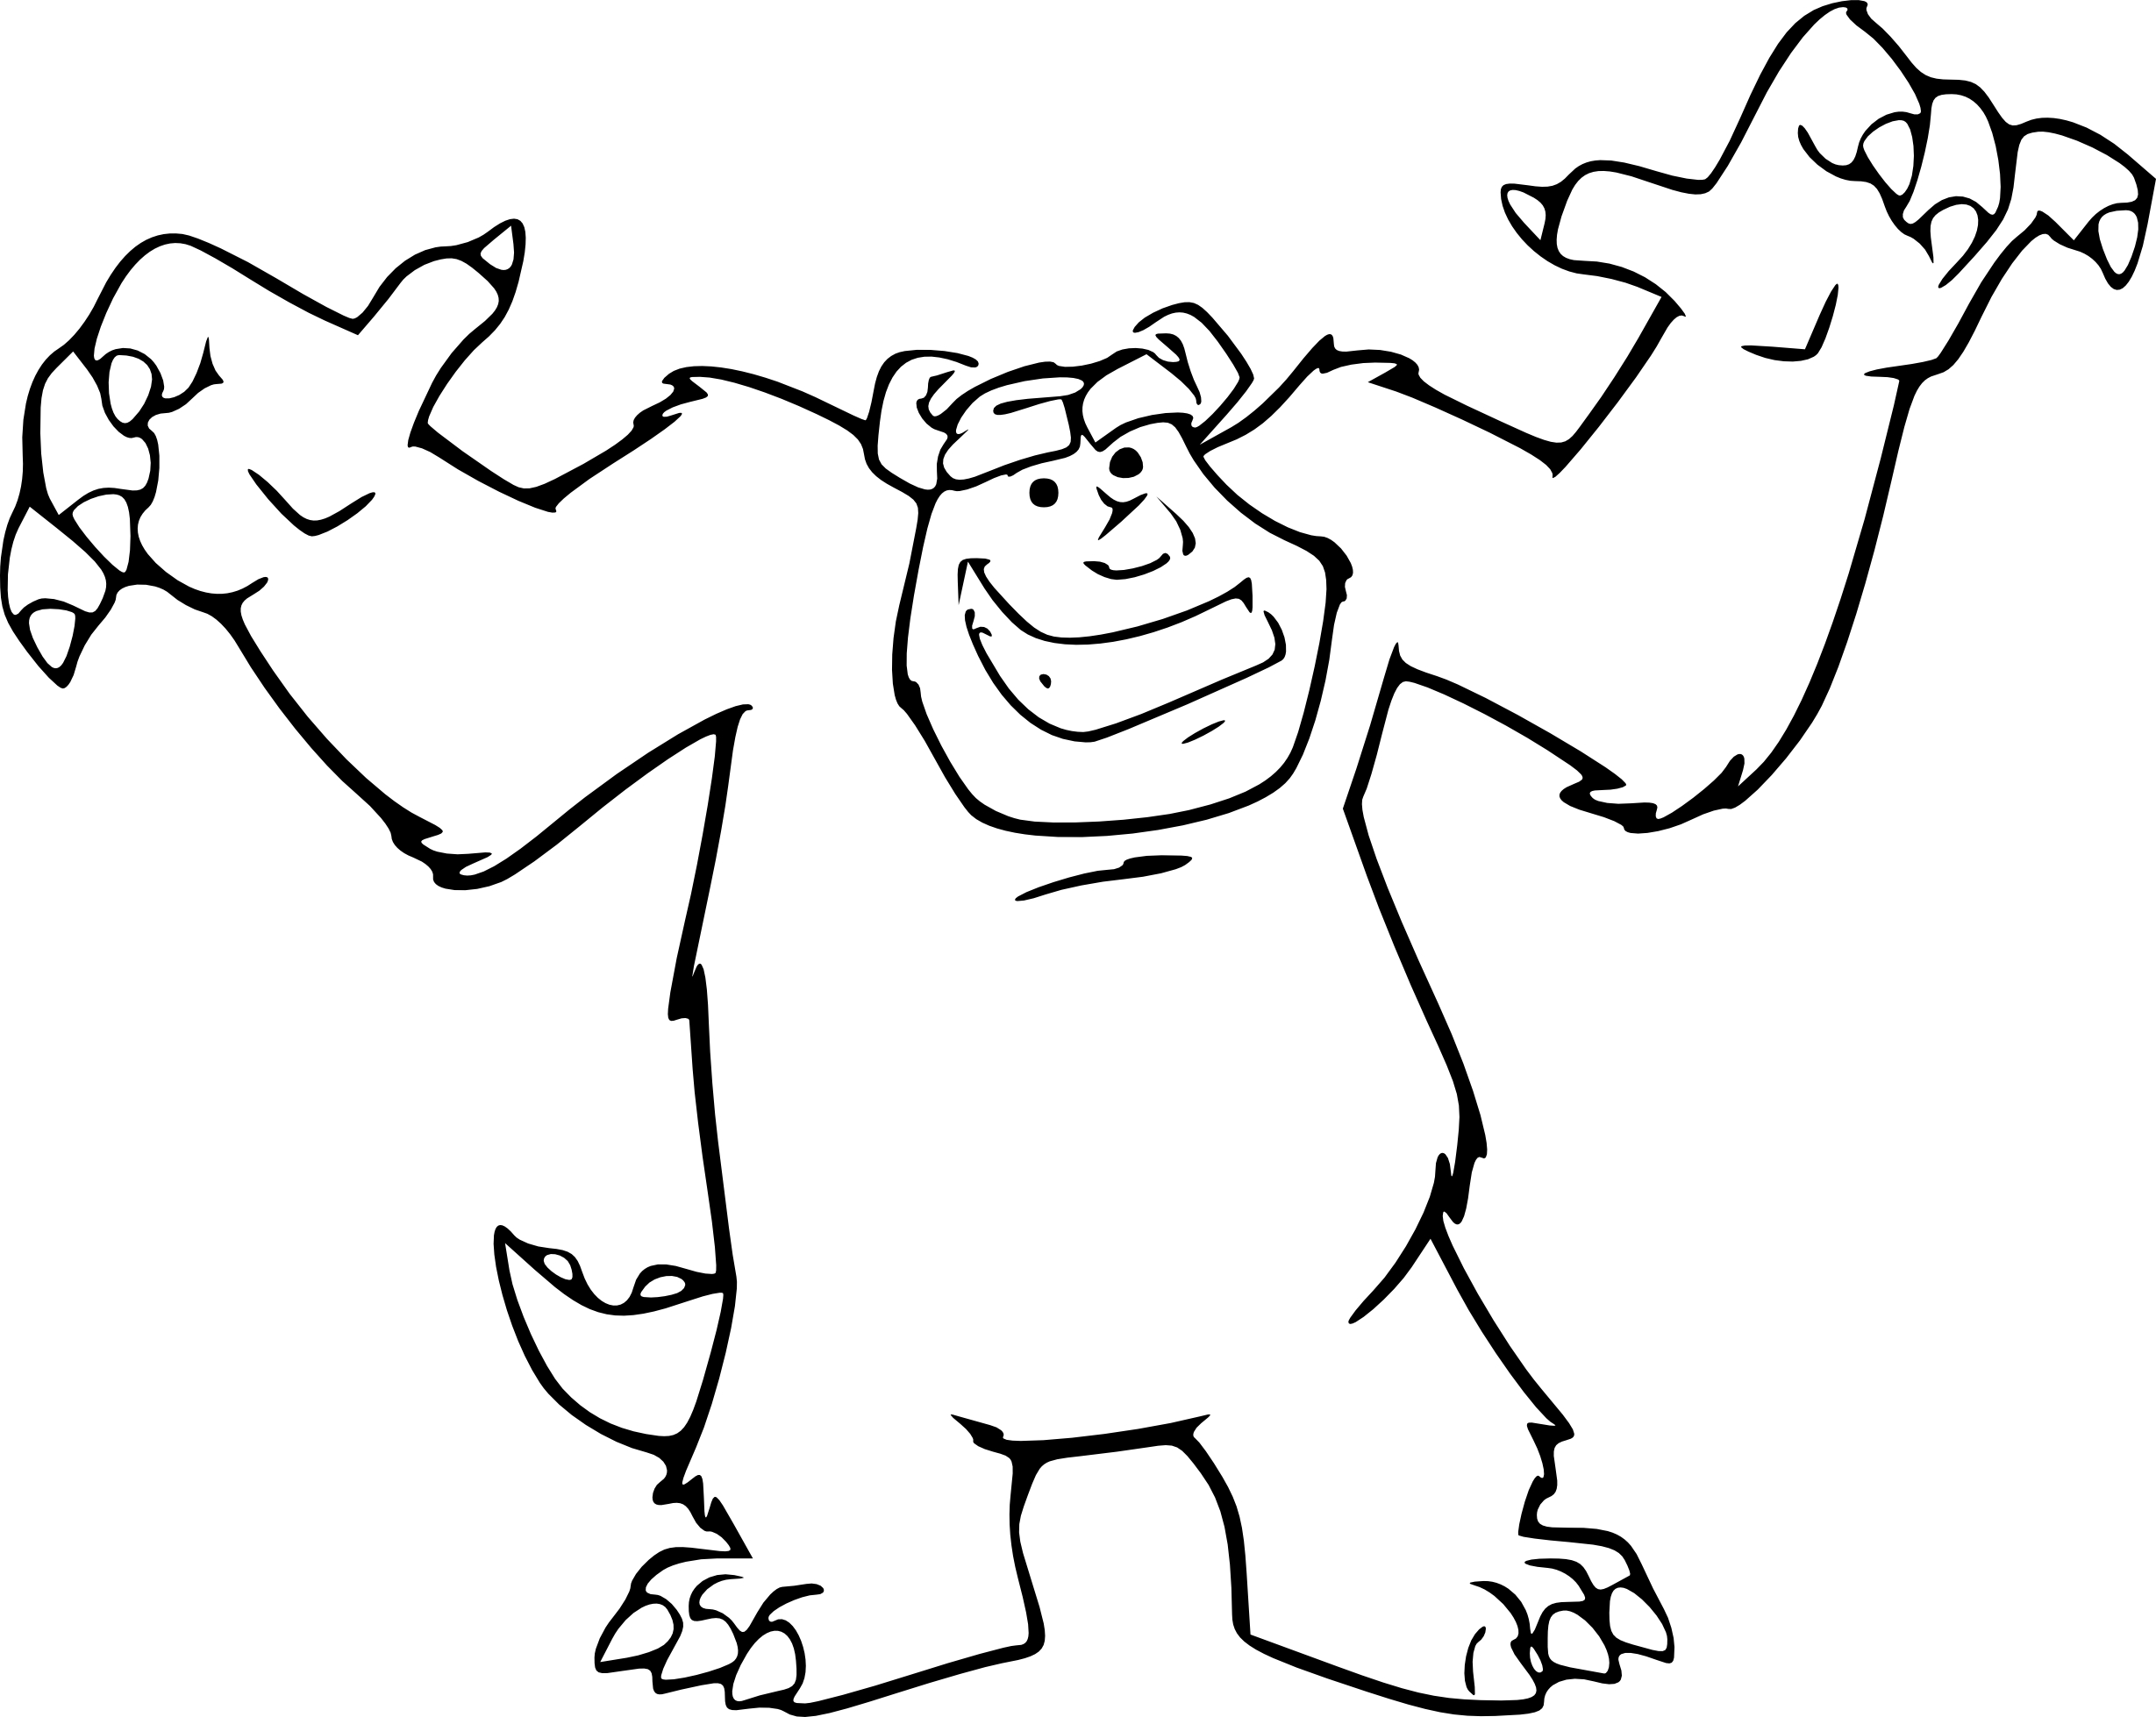 Yeti coloring page